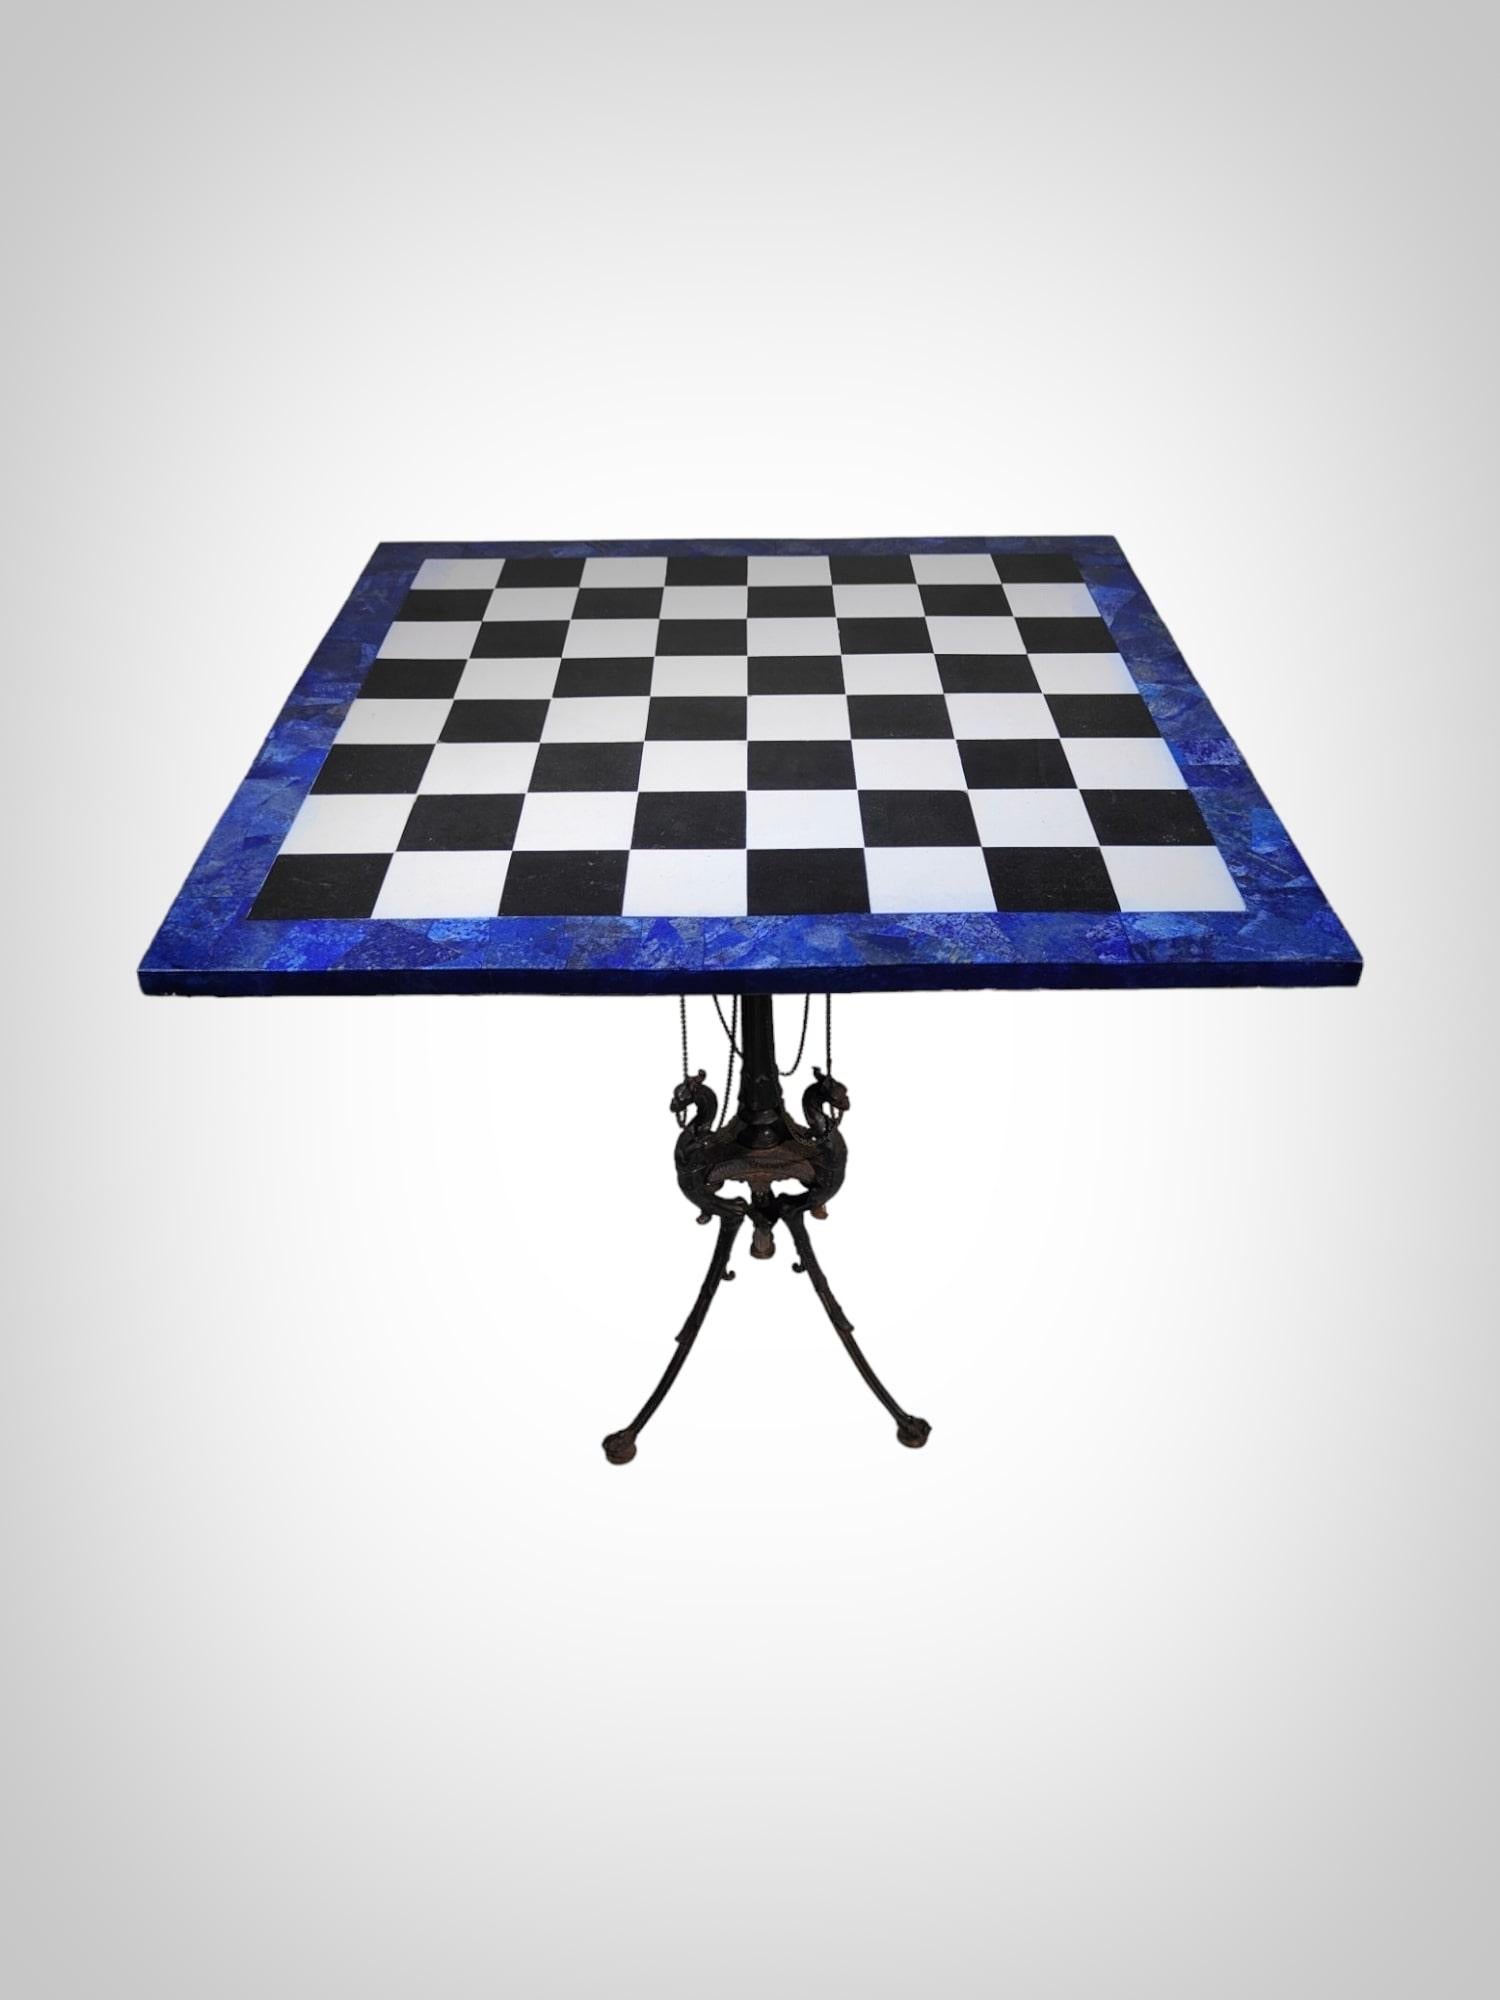 Italian Chess Table from the 1950s - Lapis Lazuli, Marble, and Dragon-Shaped  In Good Condition For Sale In Madrid, ES